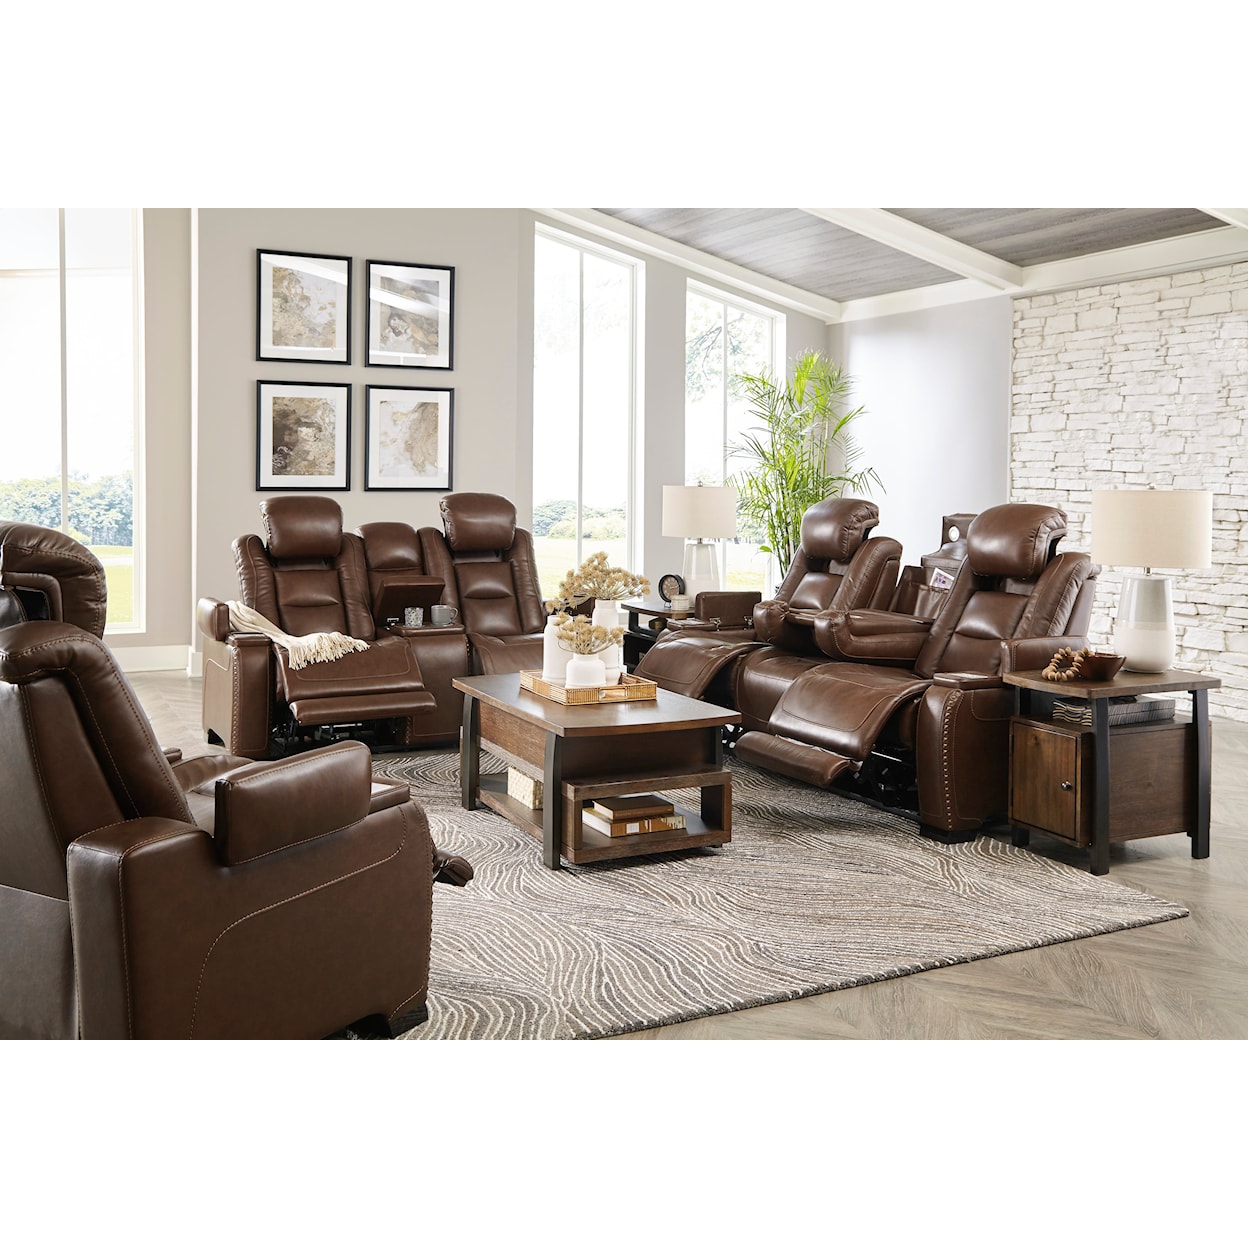 Michael Alan Select The Man-Den Power Reclining Loveseat with Console